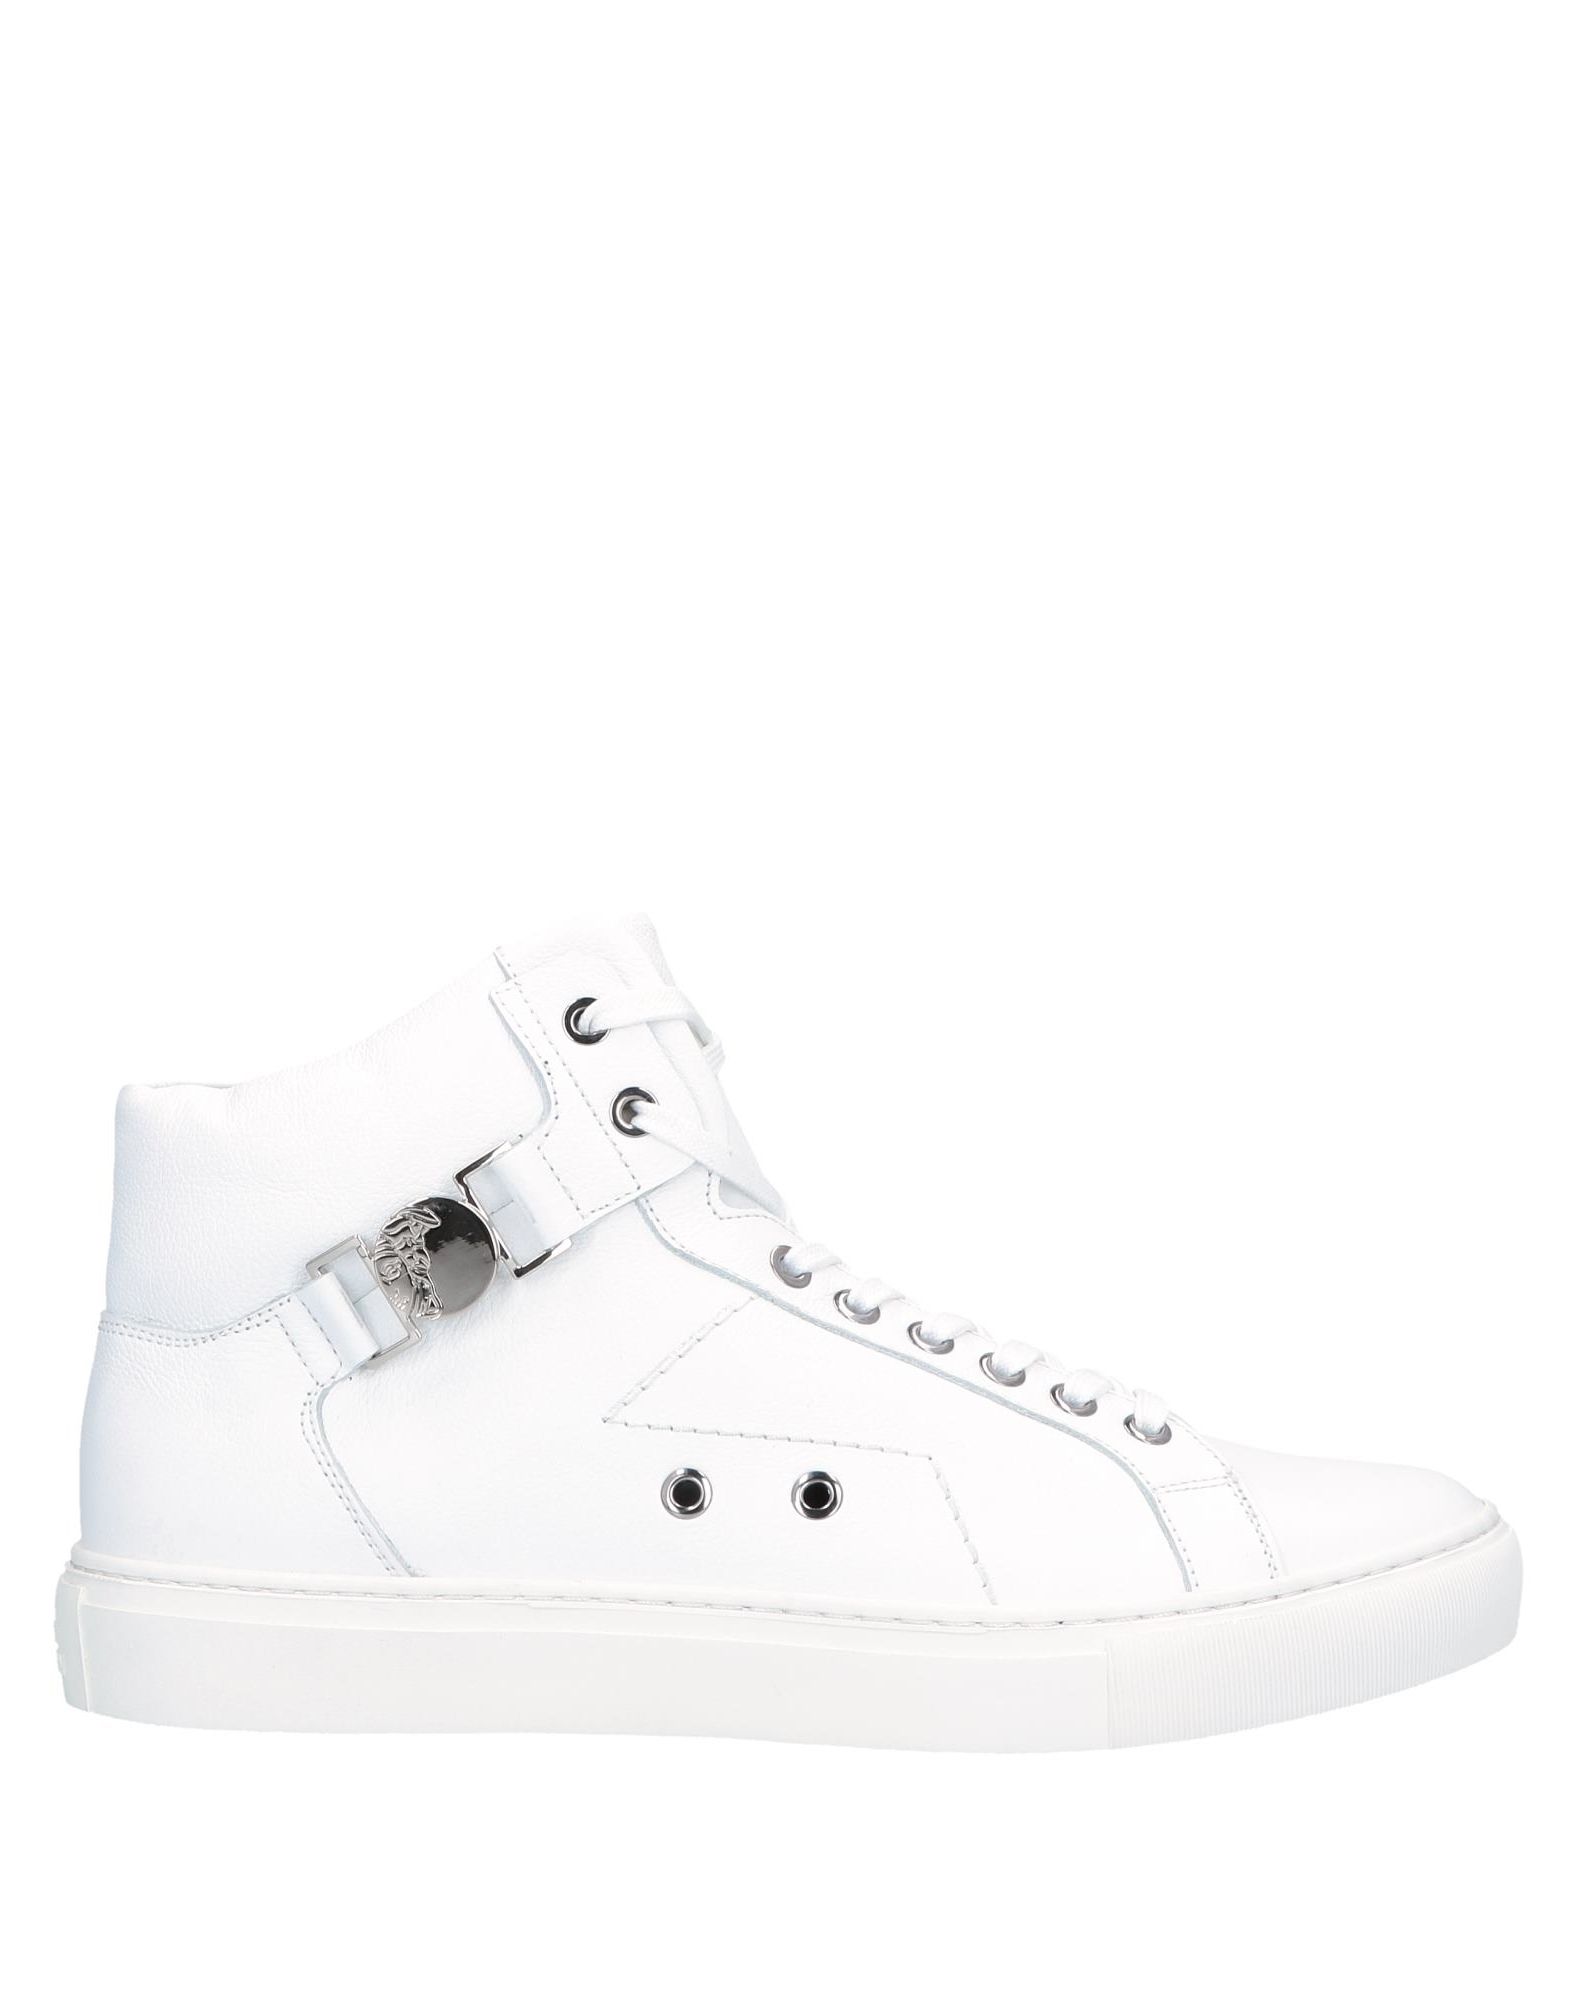 VERSACE COLLECTION High-tops & sneakers - Item 11644947